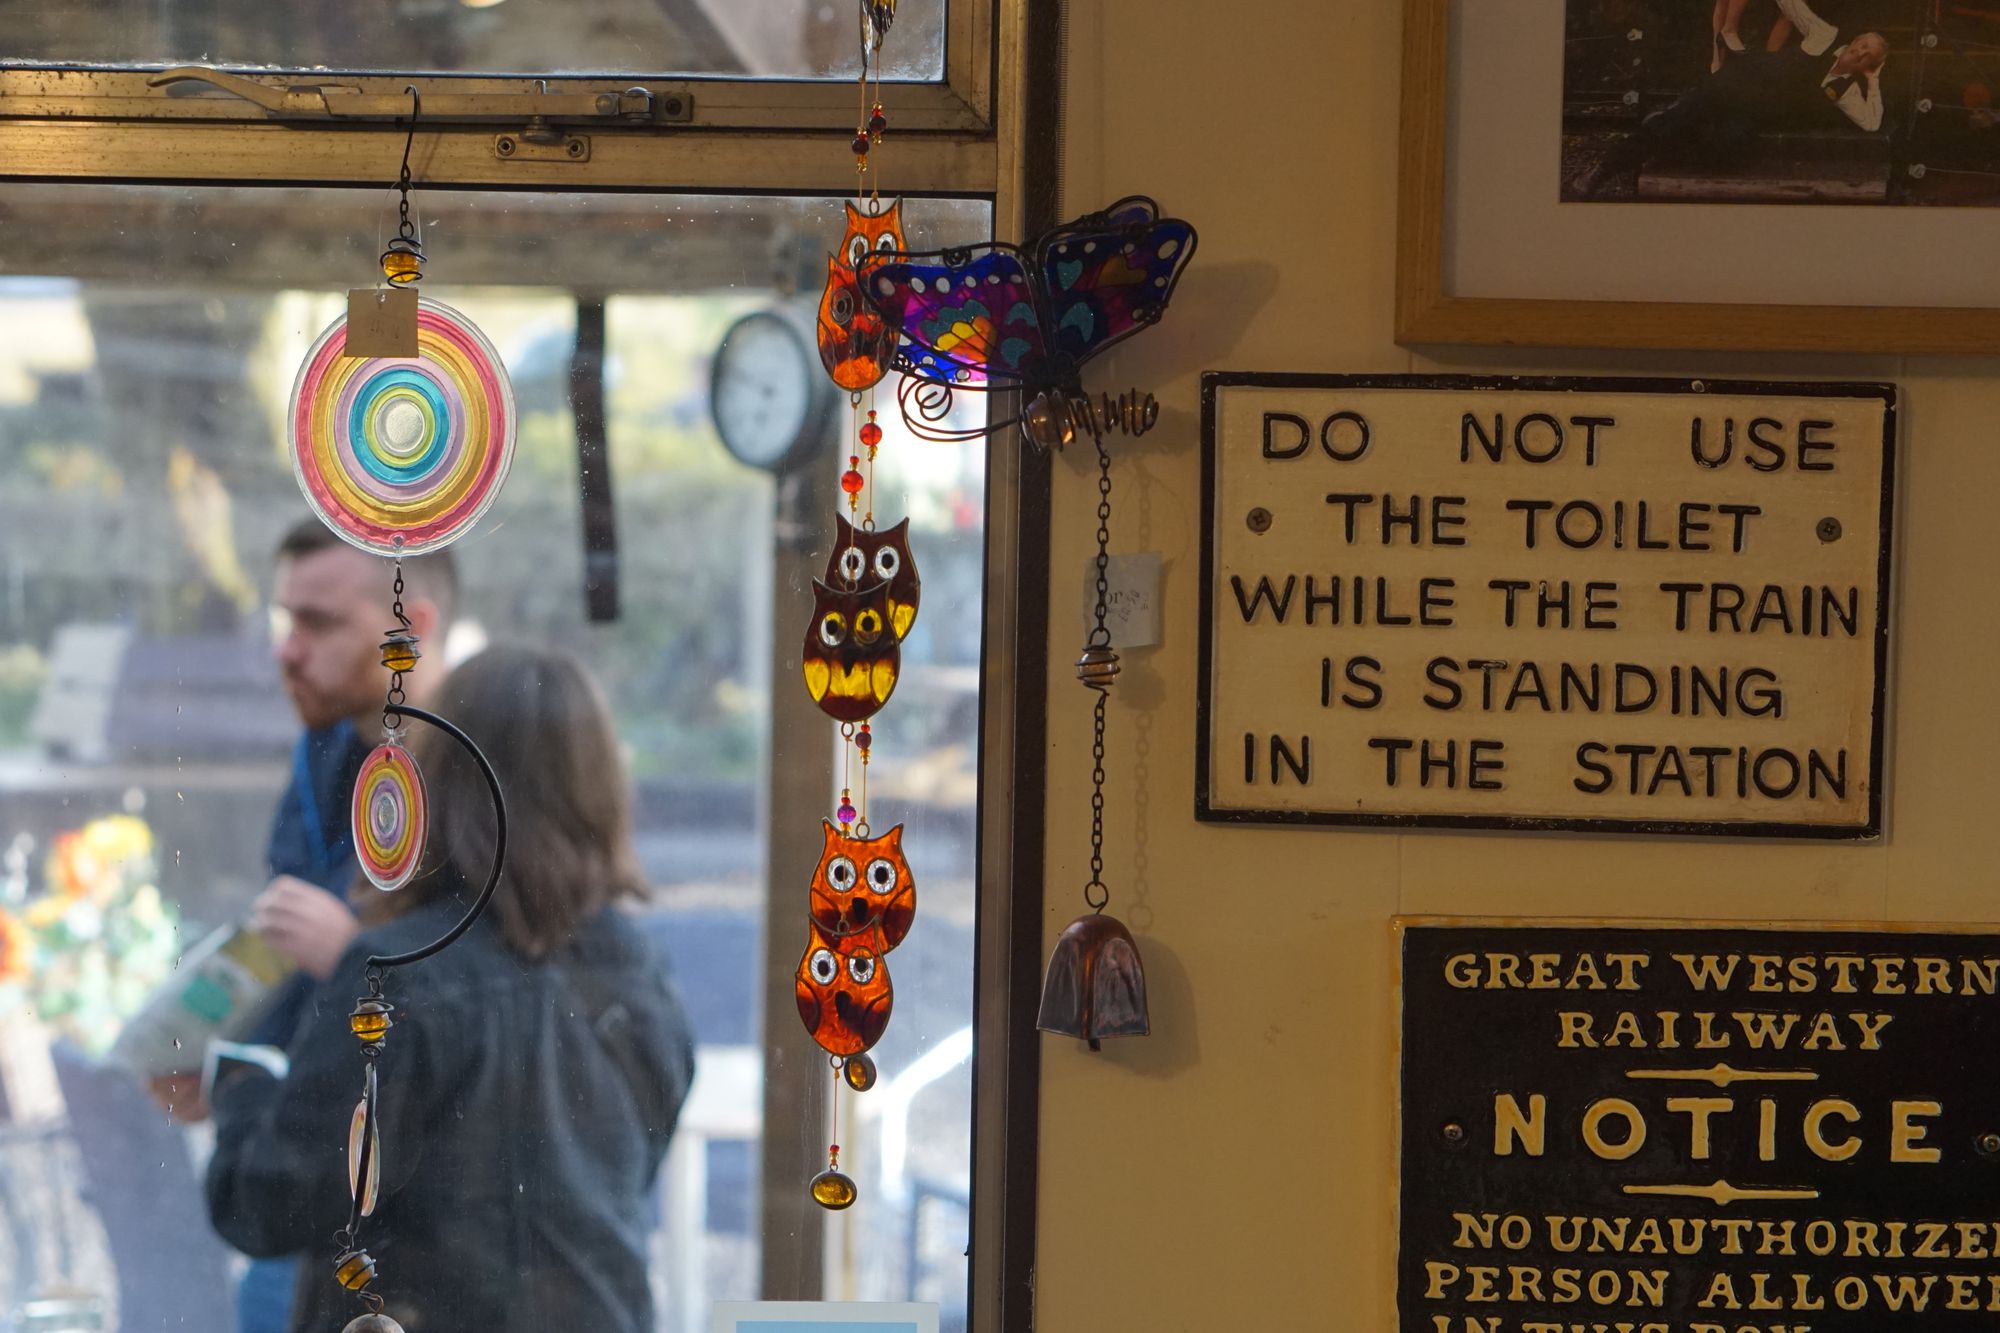 Charms of owls and butterflies hang in the window of a shop, with an old railwayana sign stuck to a wall: "DO NOT USE THE TOILET WHILE THE TRAIN IS STANDING IN THE STATION"